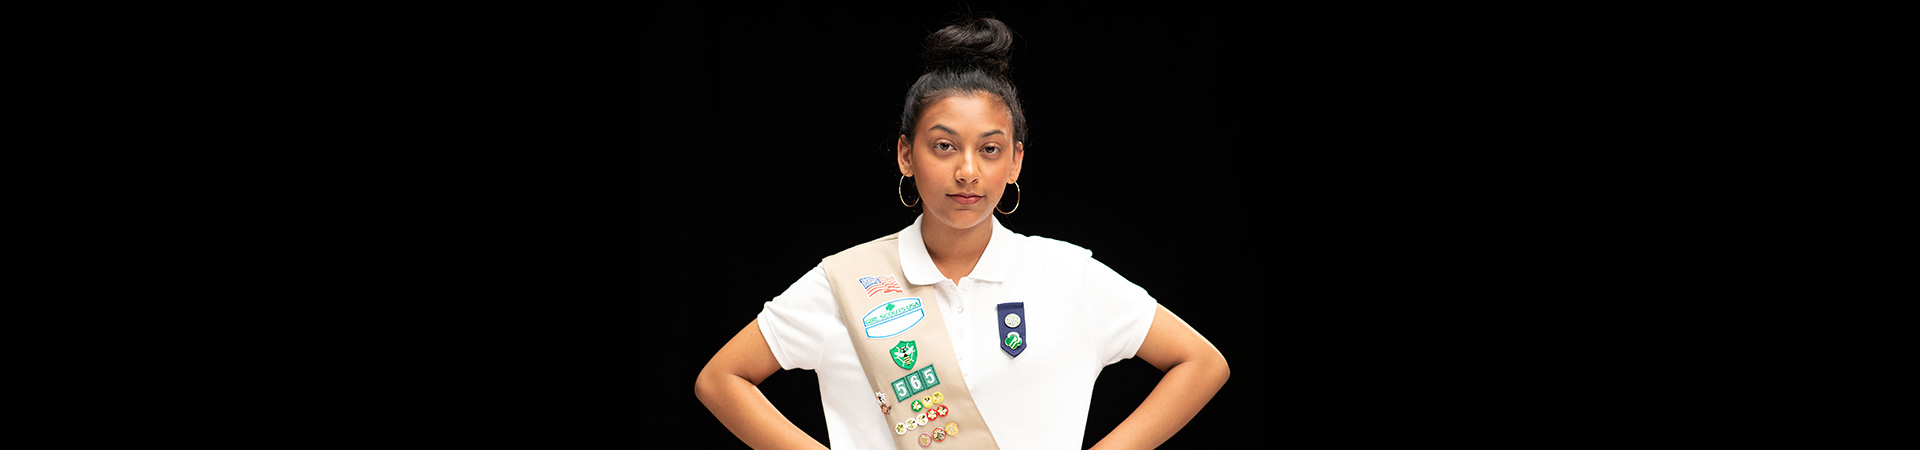  silver award girl scout standing with her hands on her hips in front of a black background 